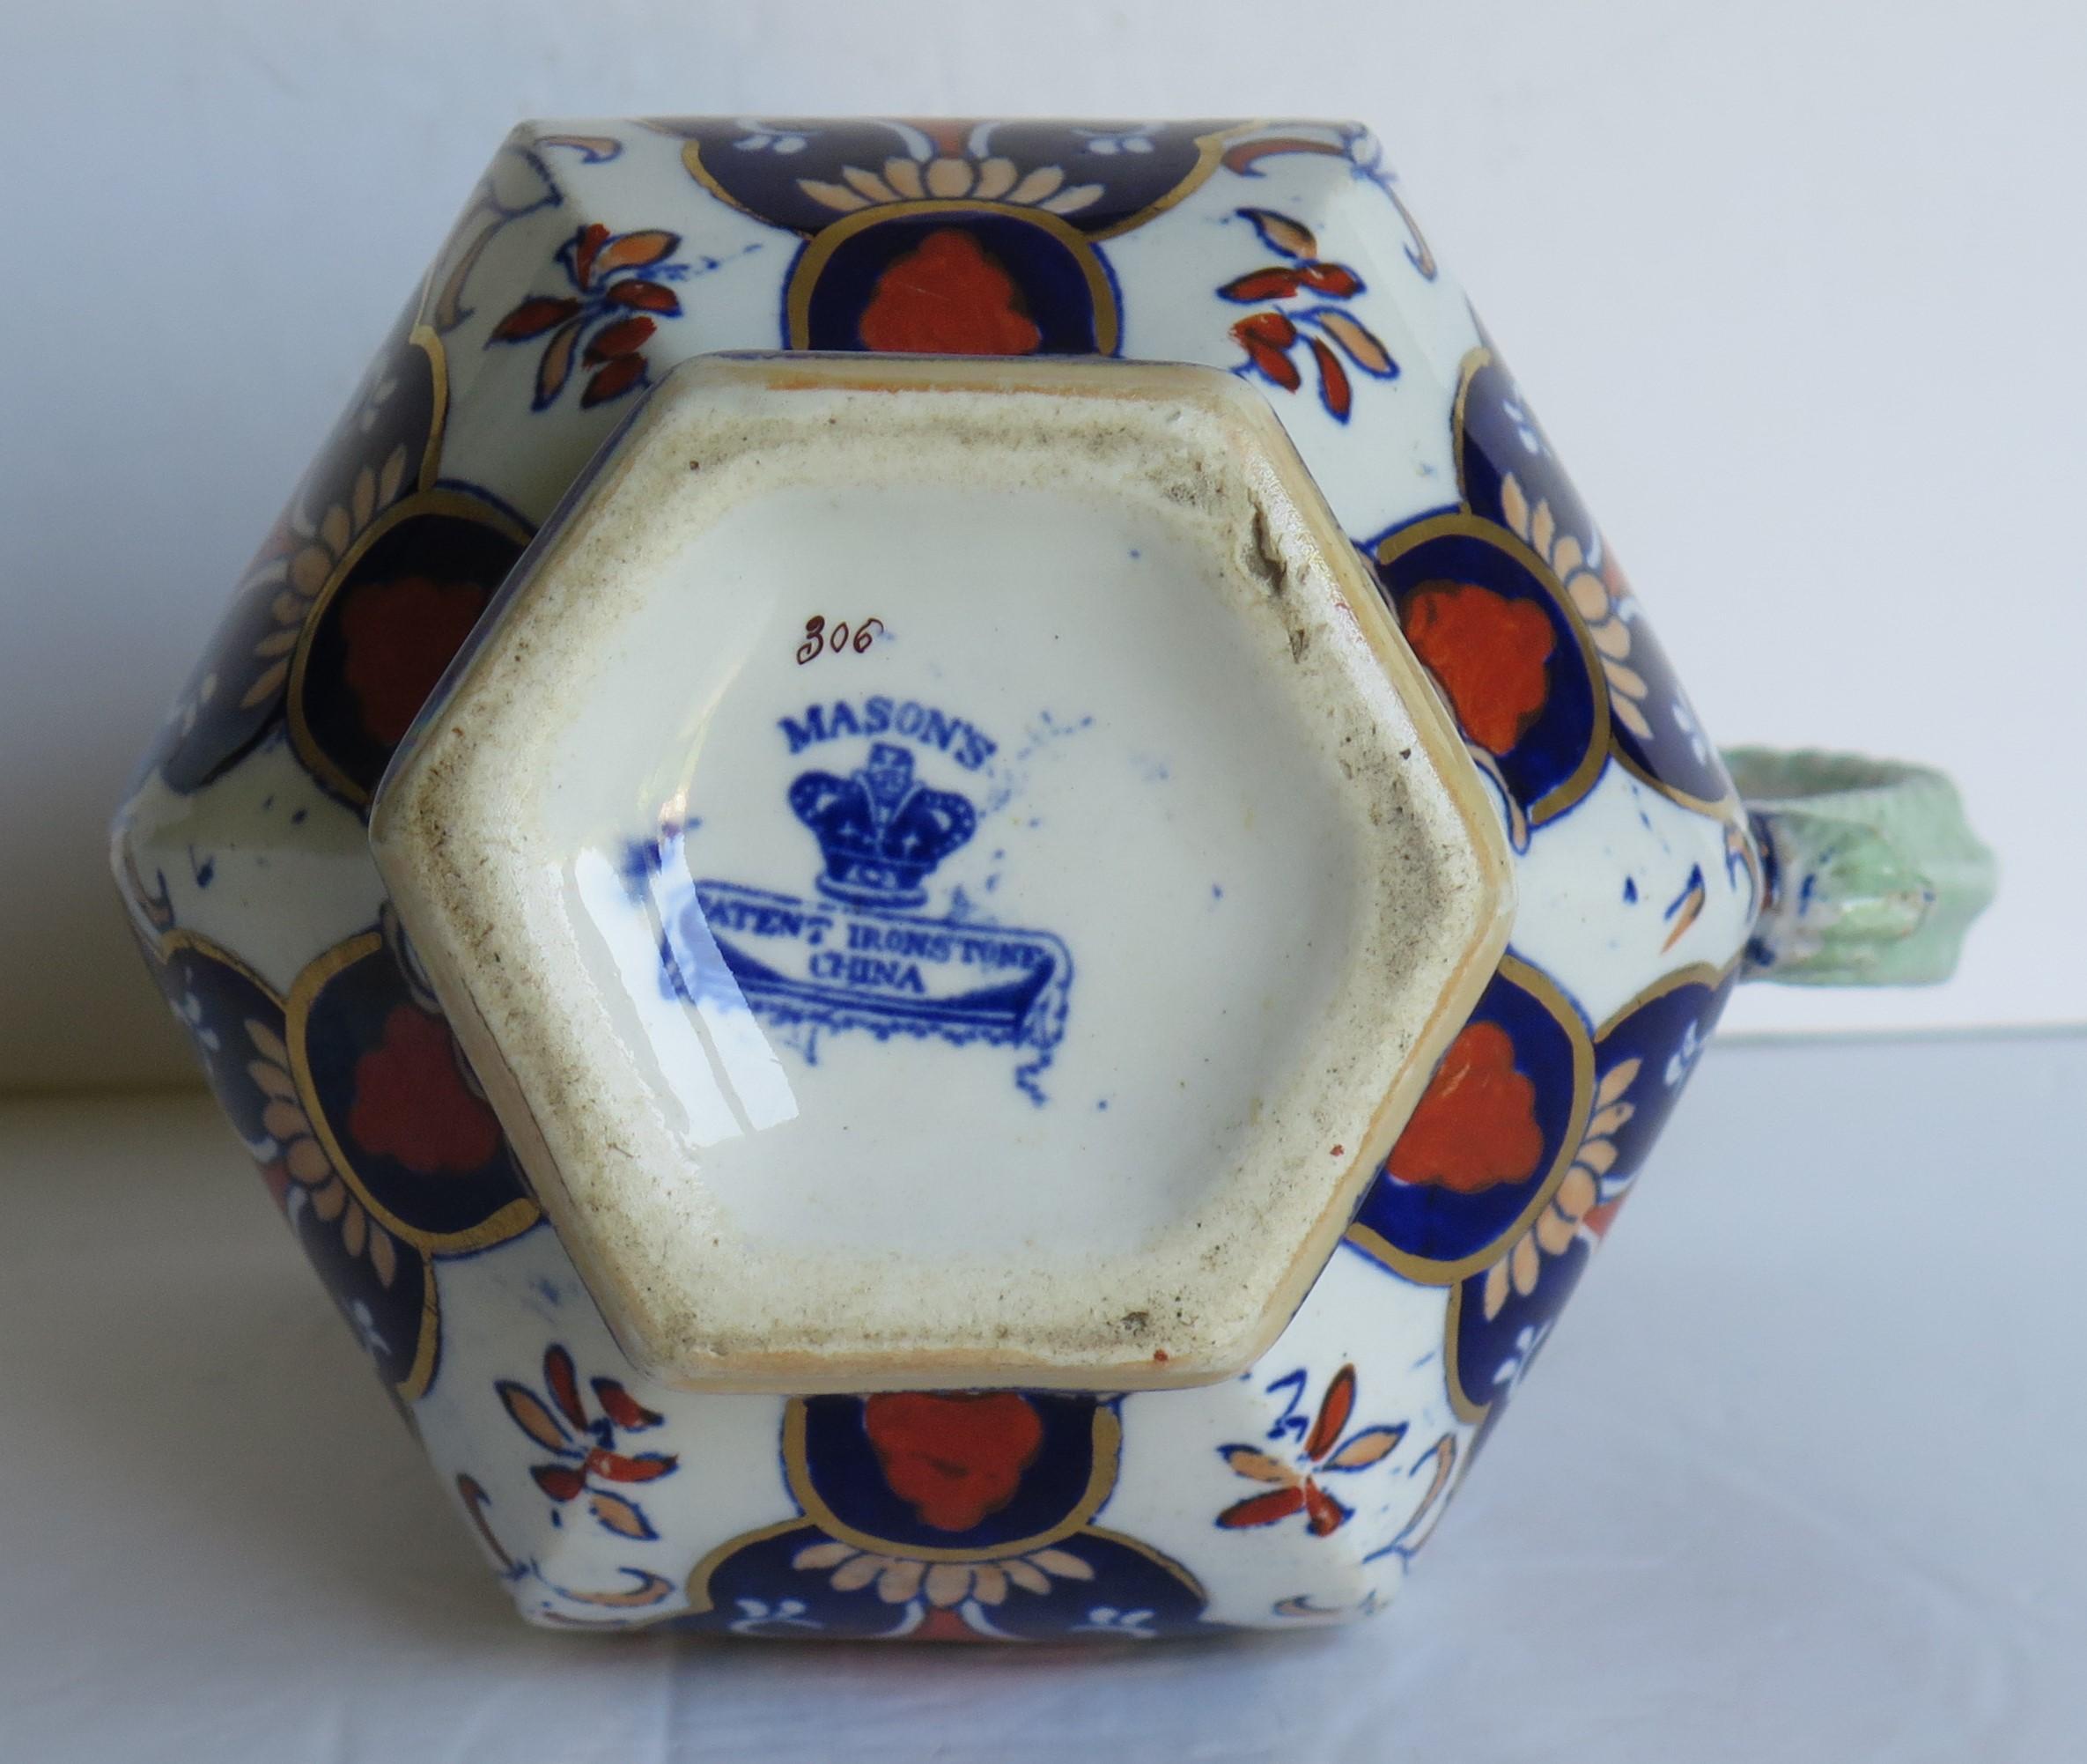 Mason's Ironstone Jug or Pitcher in Rare Shape and Pattern 306, circa 1830 10